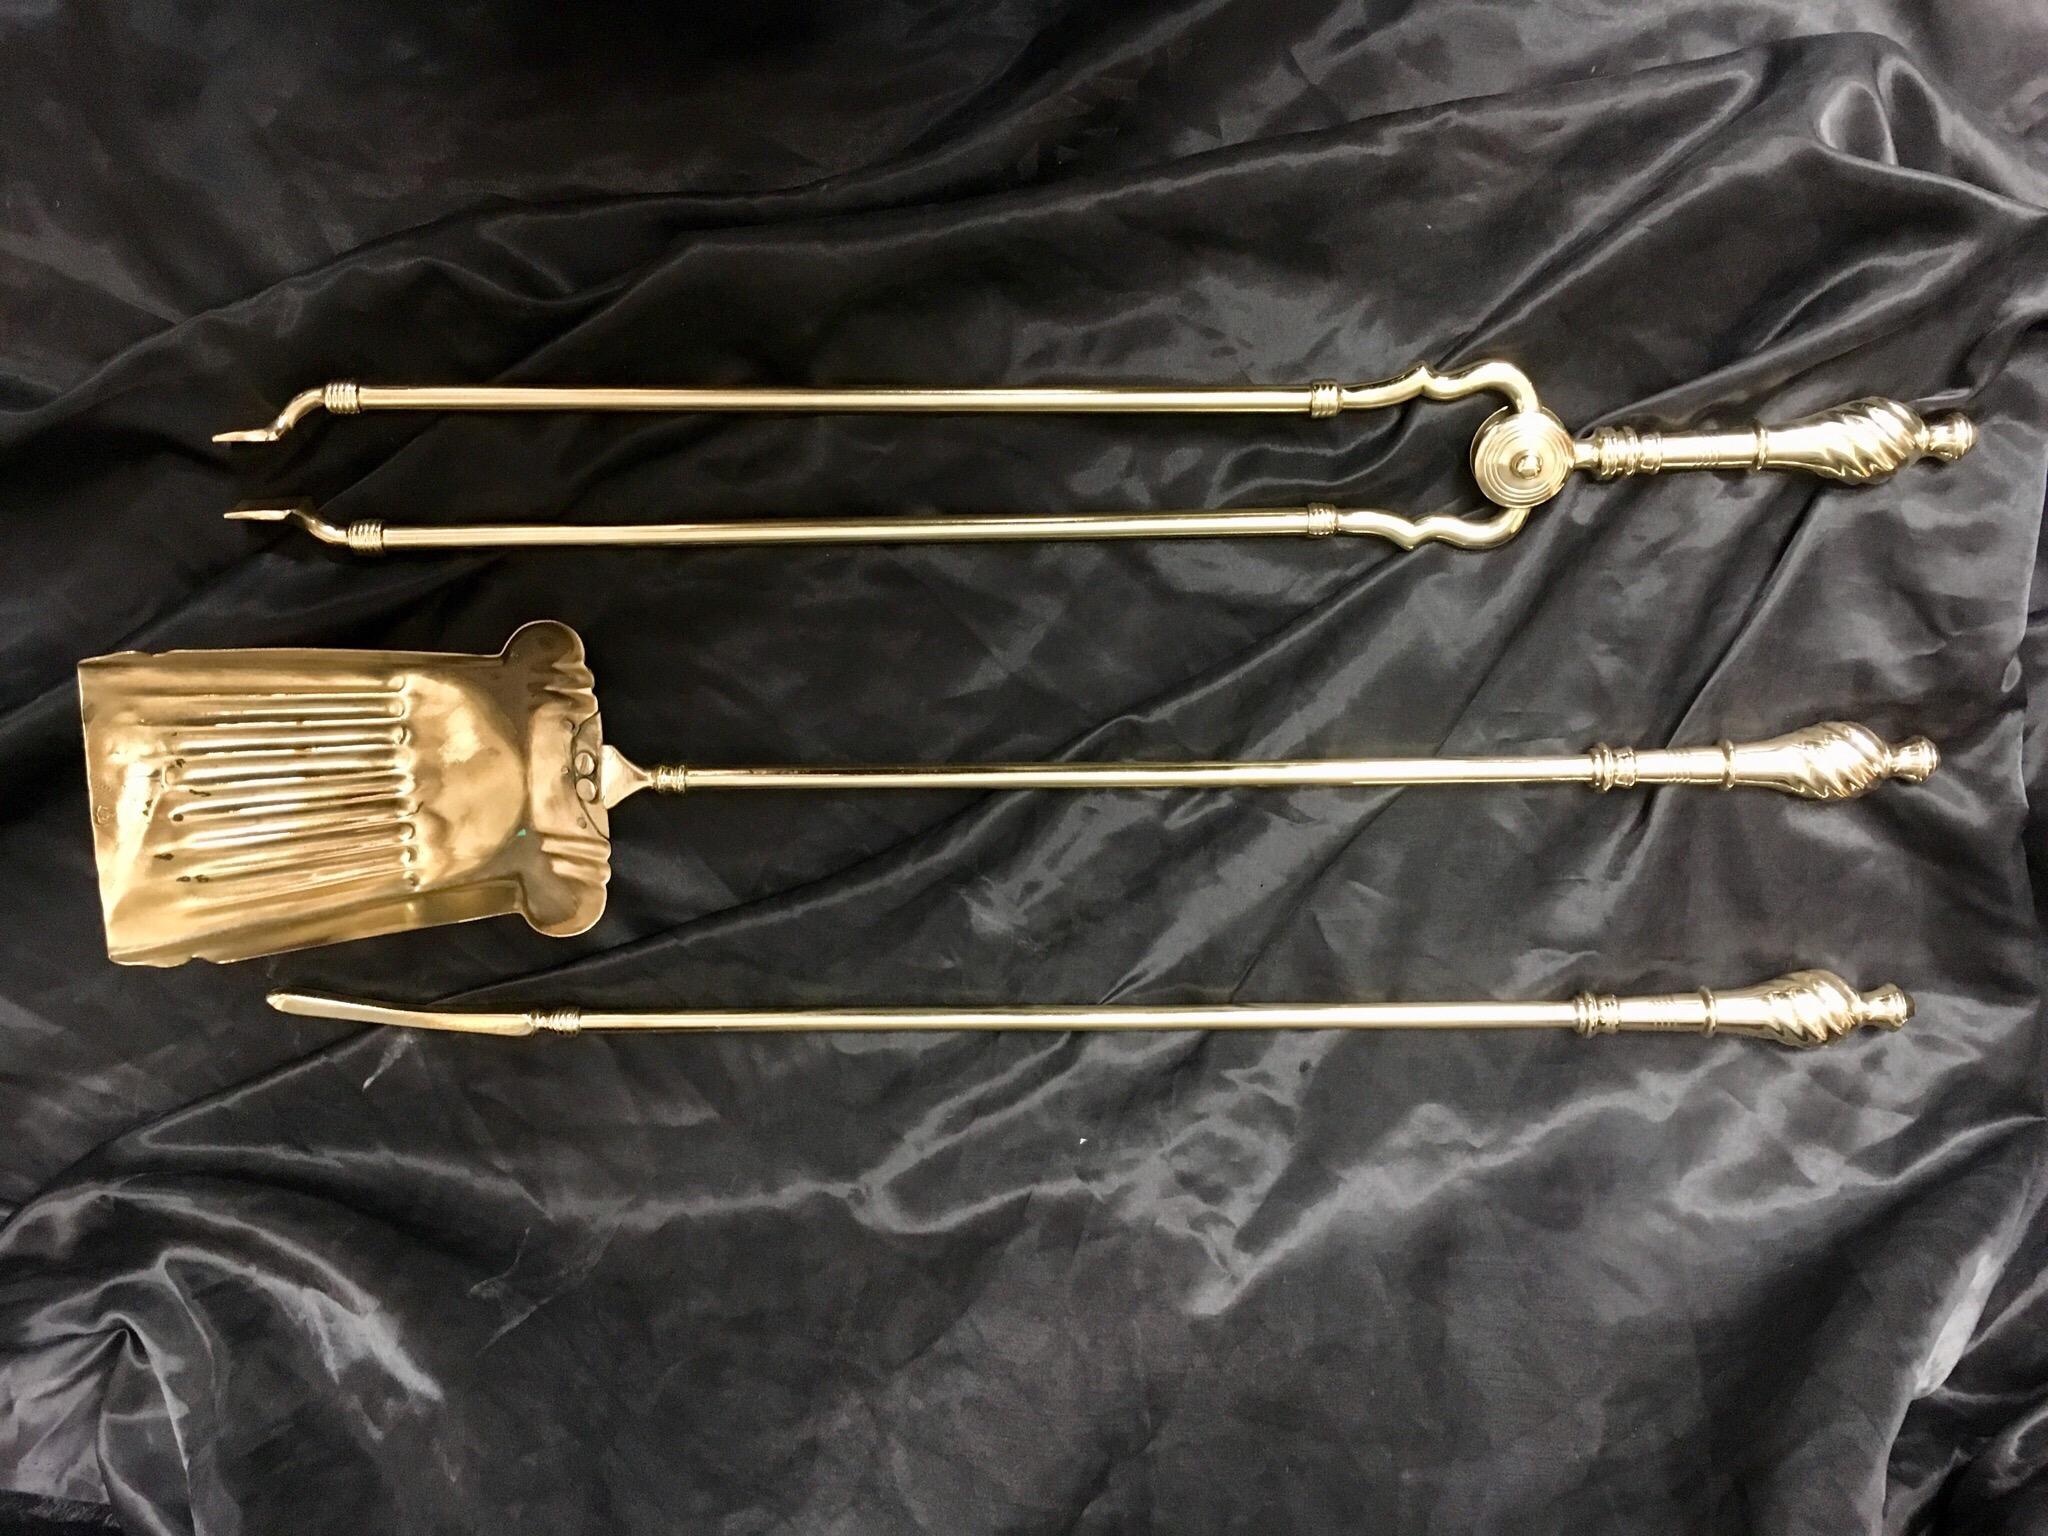 A set of three Victorian 19th century brass fire Irons consisting of a poker, a shovel, and a pair of tongs, each with a spiral and pommel finial handle.

English, circa 1890.